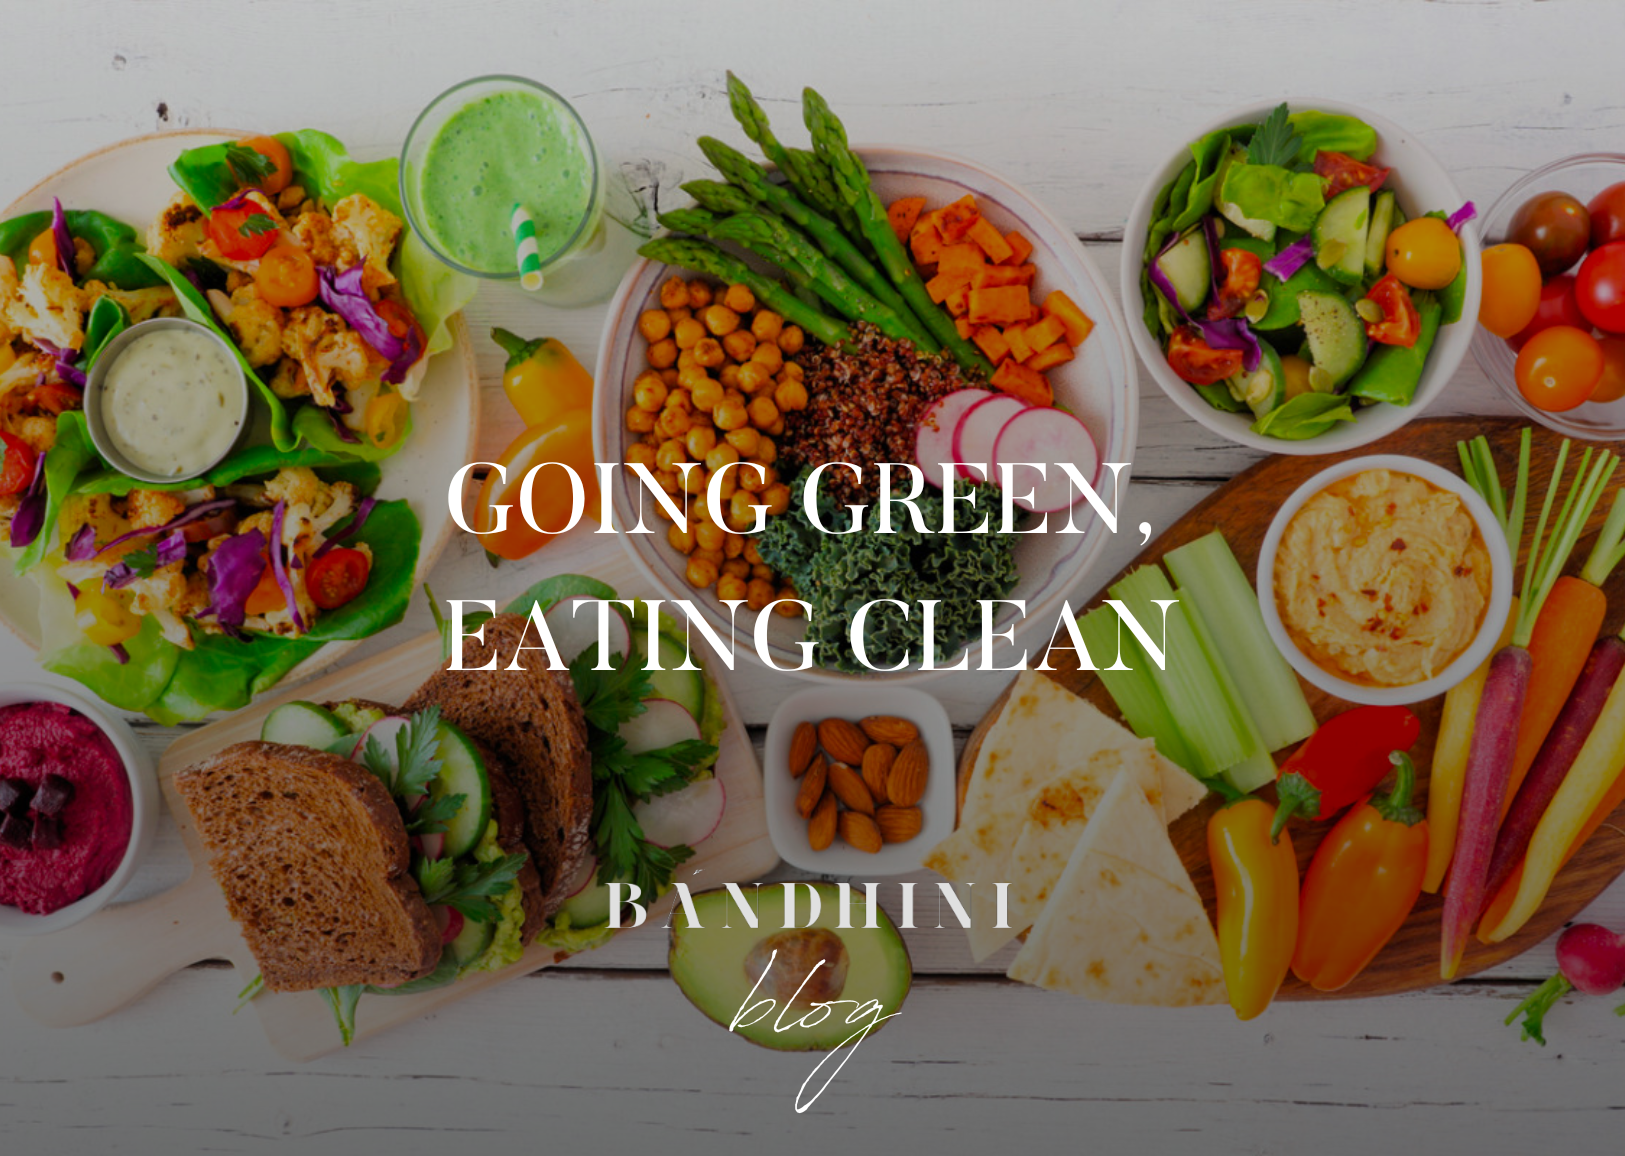 Going green, eating clean